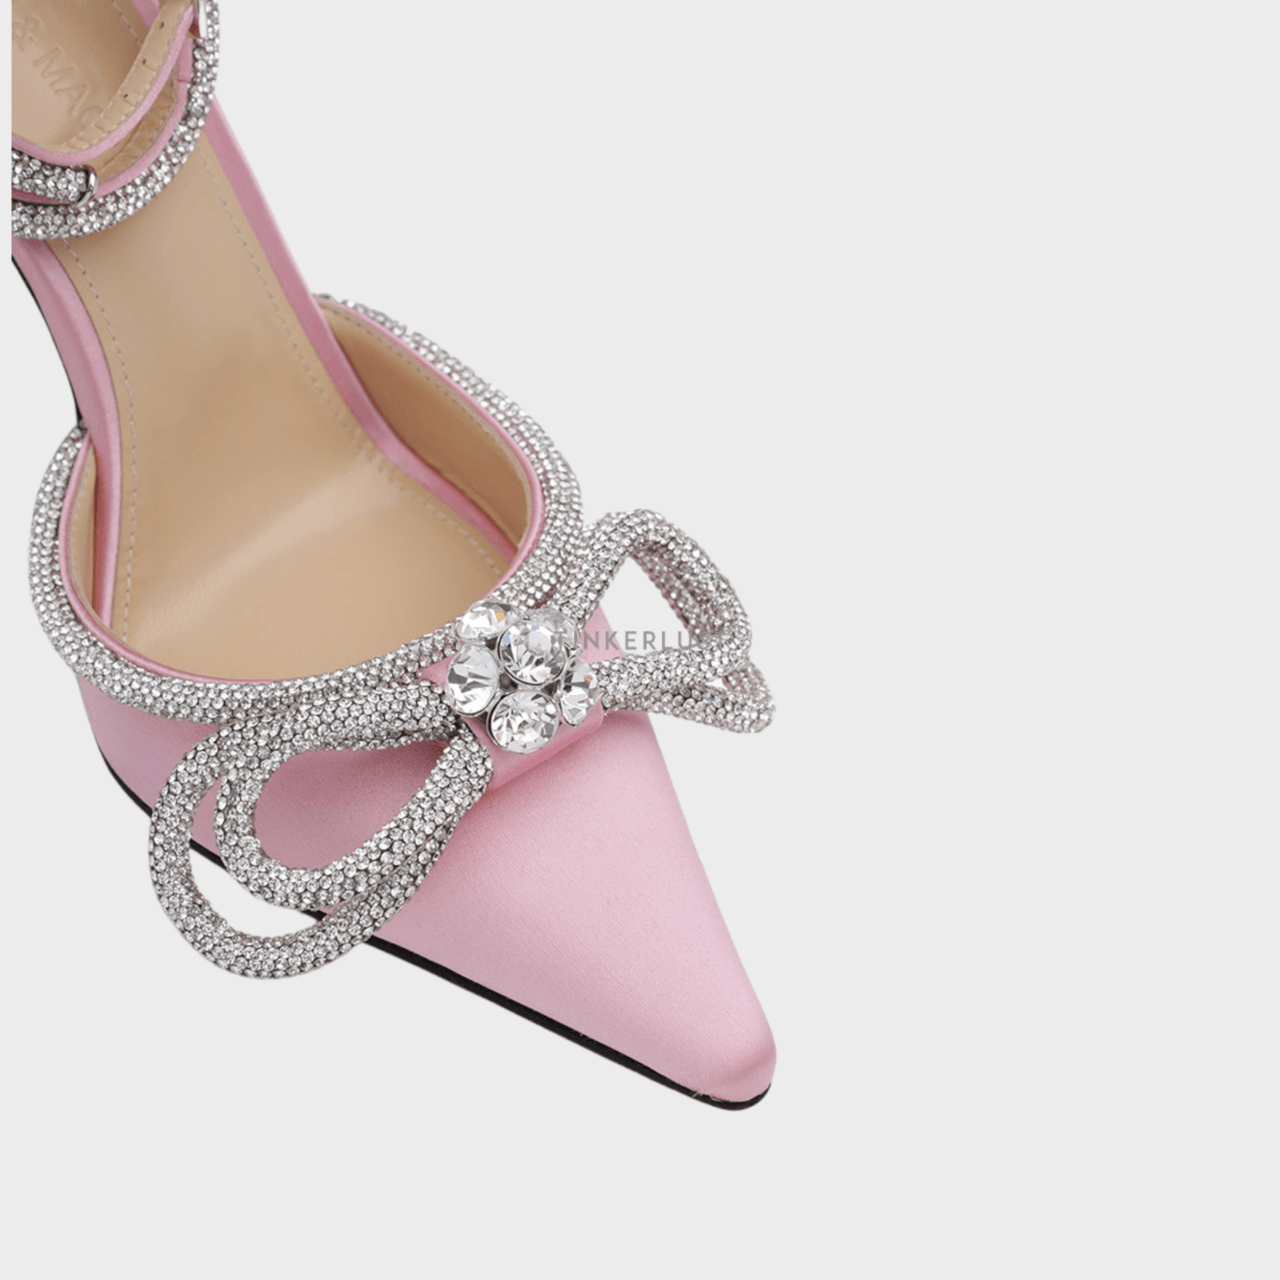 MACH & MACH Women Crystal Double Bow Ankle Strap Pumps 110mm in Pink